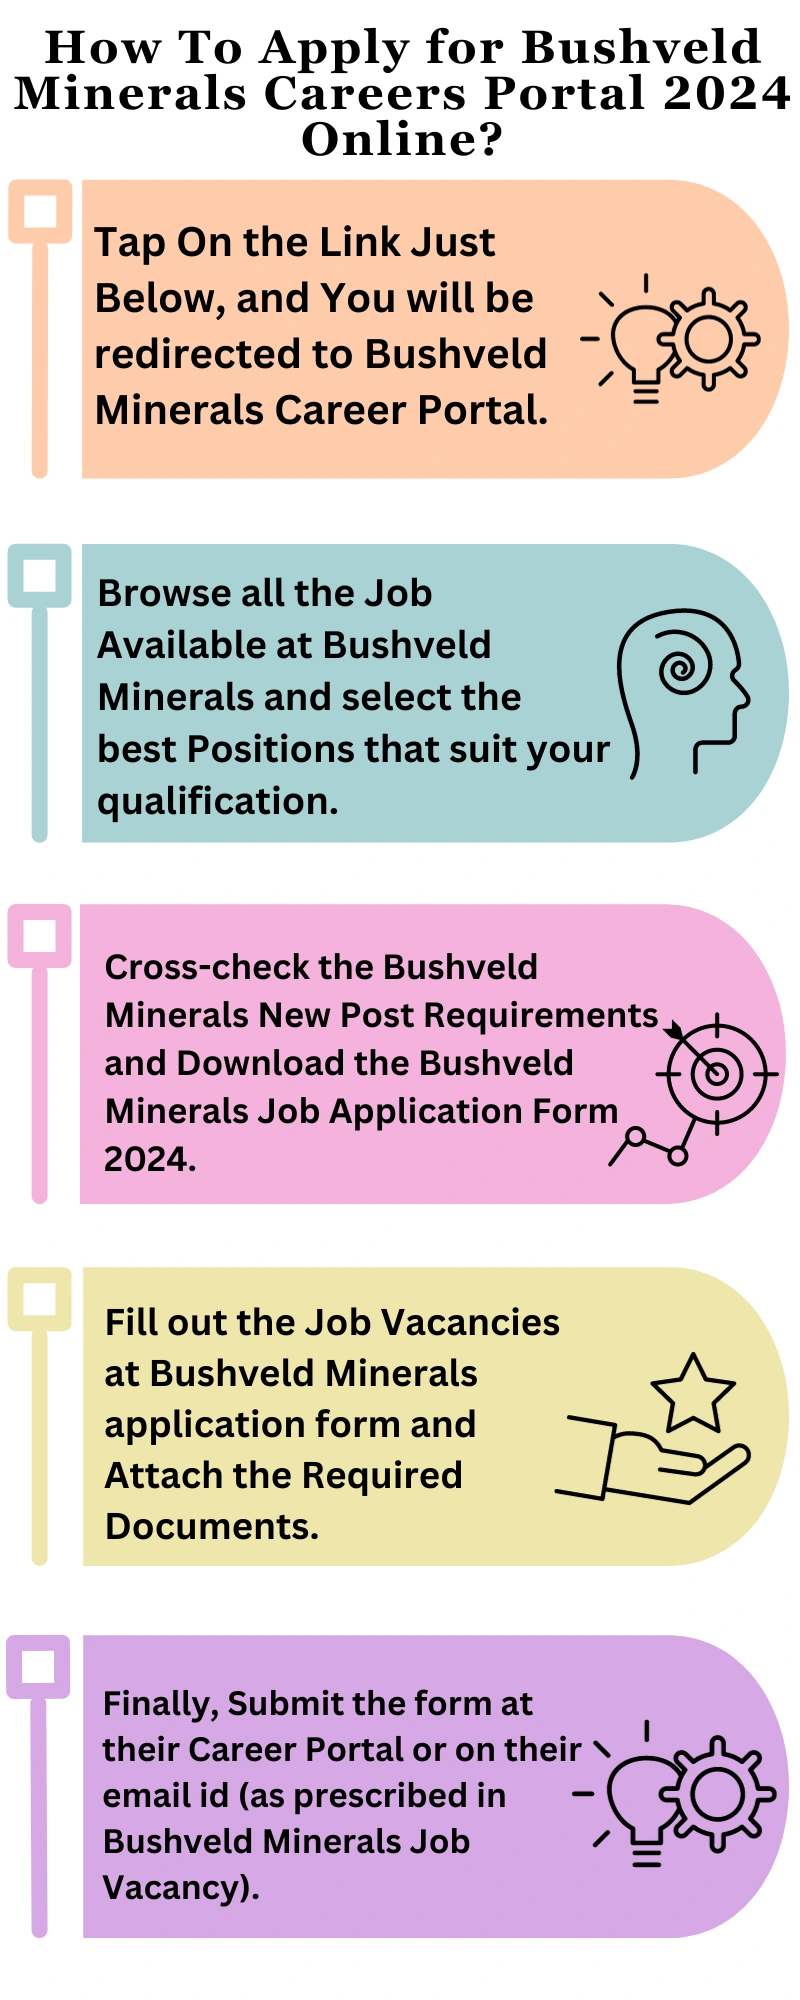 How To Apply for Bushveld Minerals Careers Portal 2024 Online?